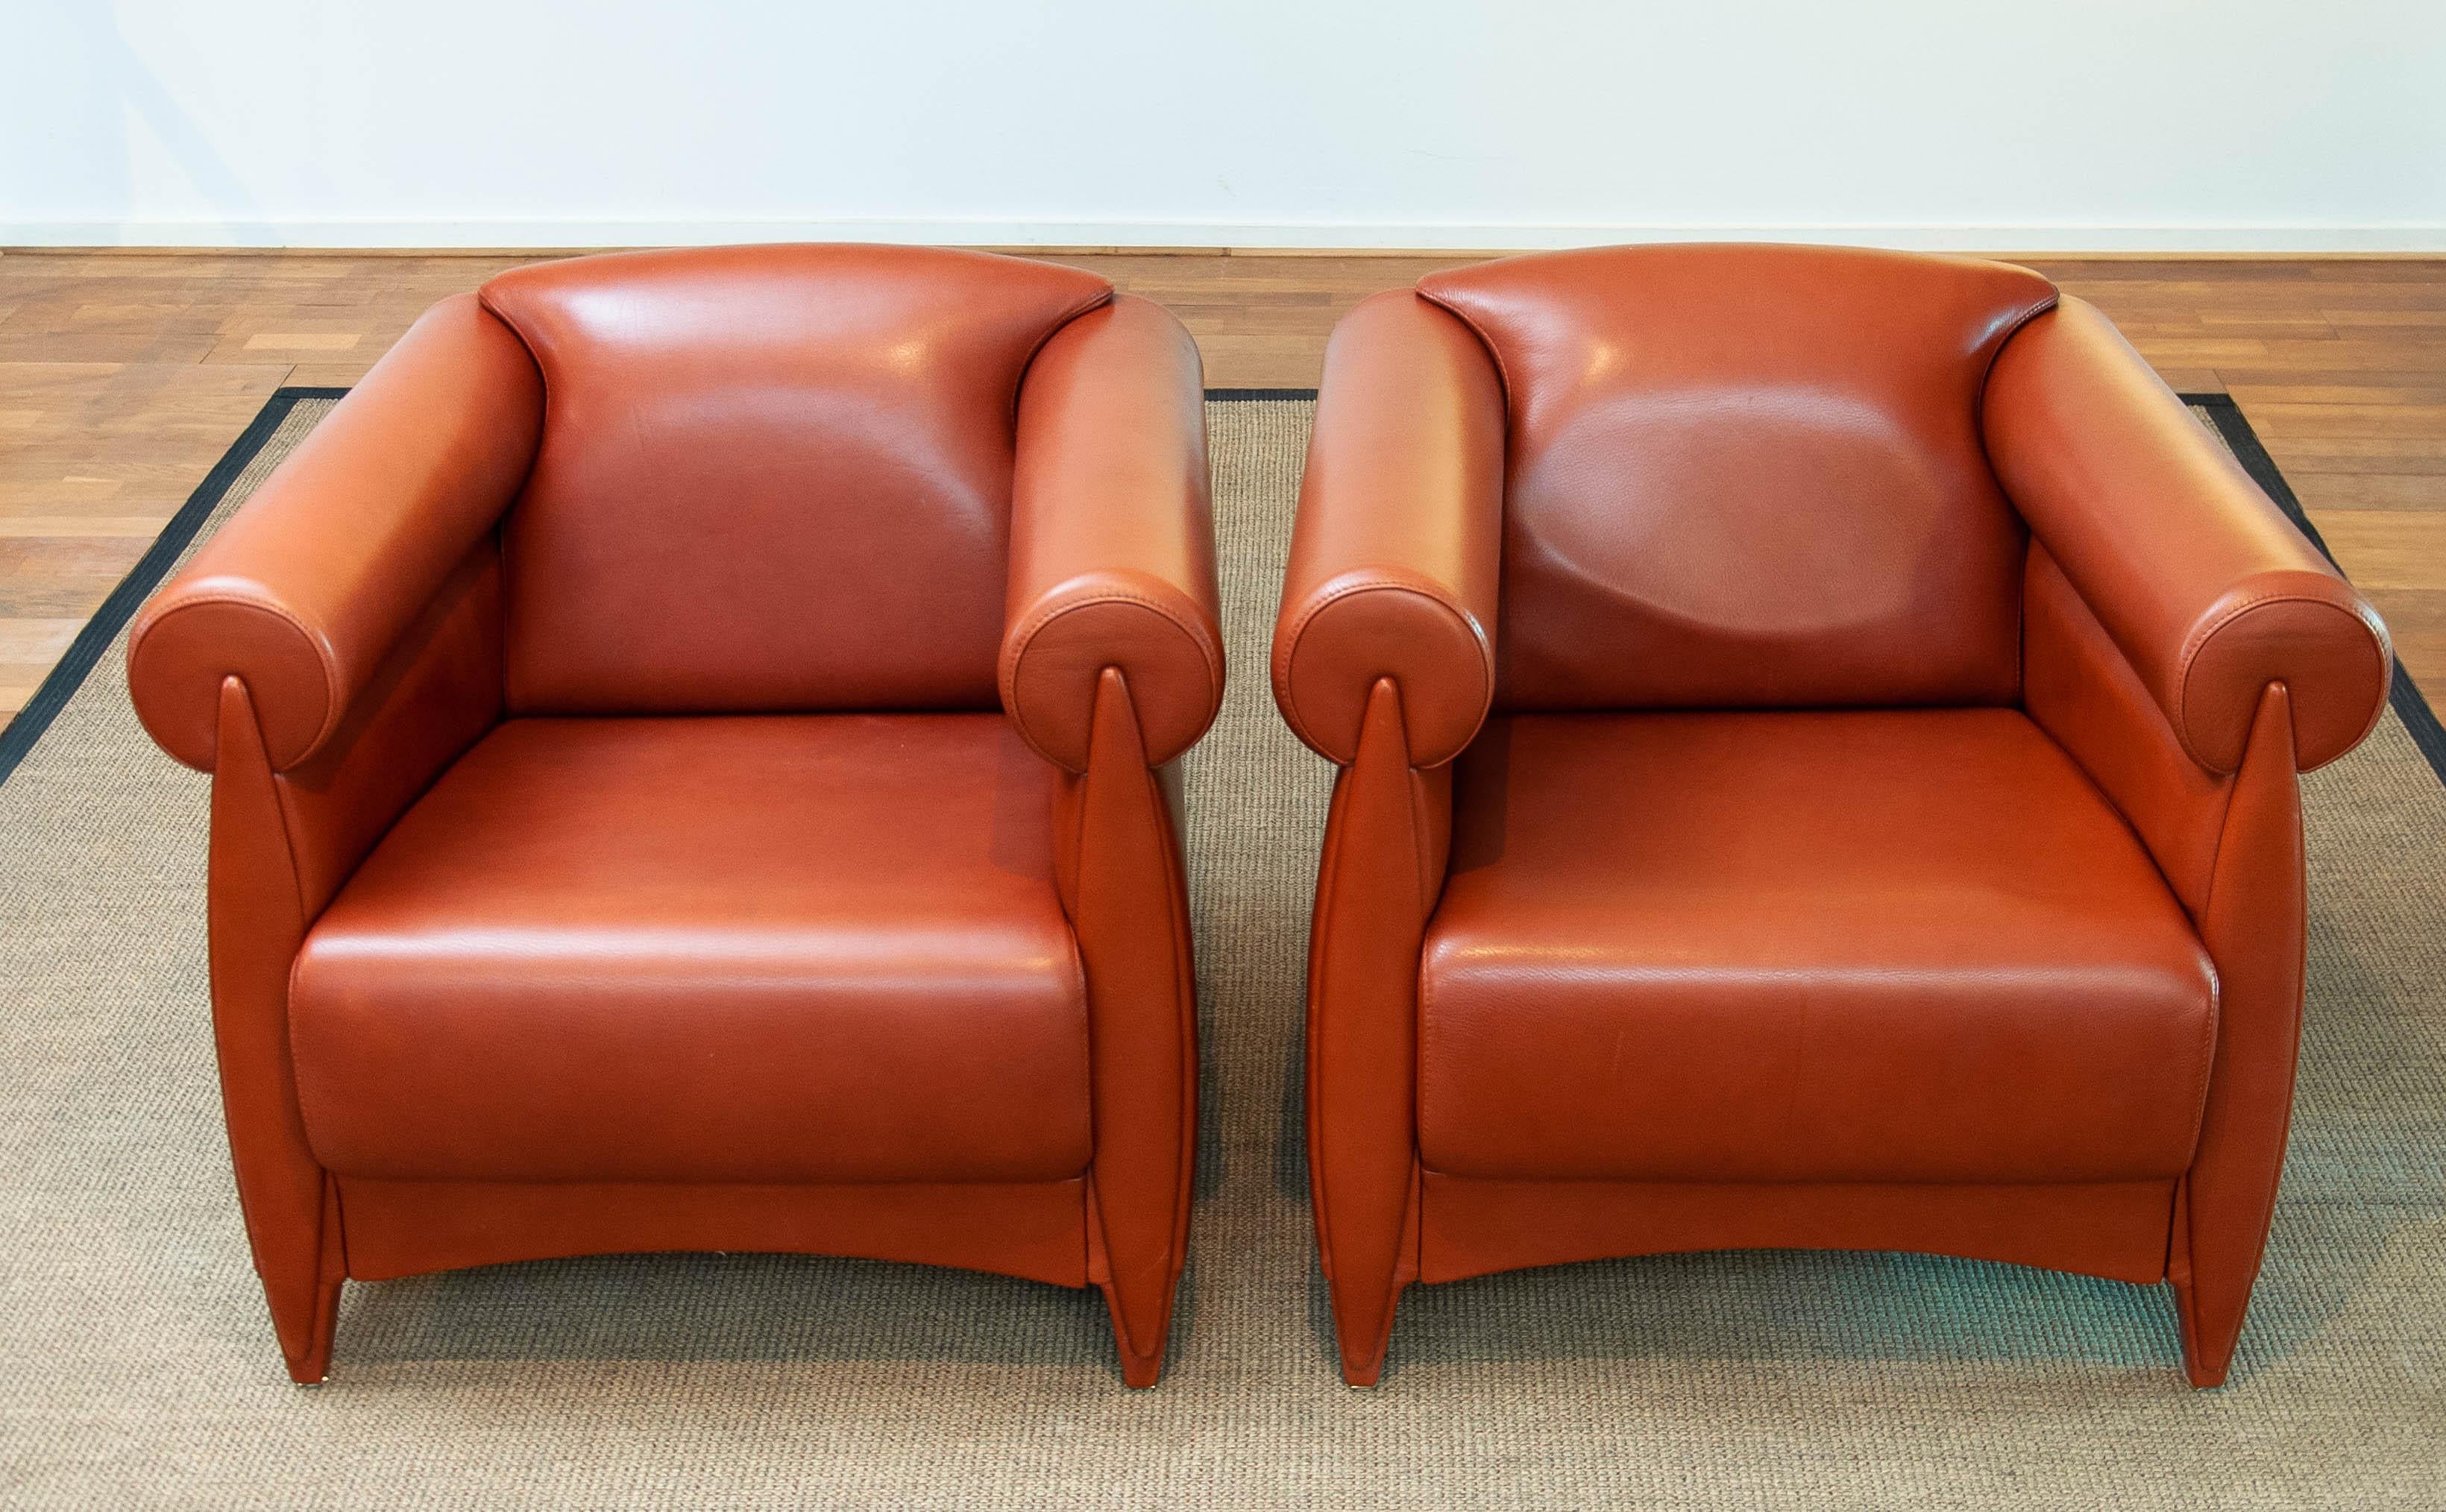 Very exclusive and rare pair lounge chairs / club chairs by the Danish designer Klaus Wettergren in limited quantity and only on special request build by selective orders.
The pair is build in a very high standard and only the best materials are